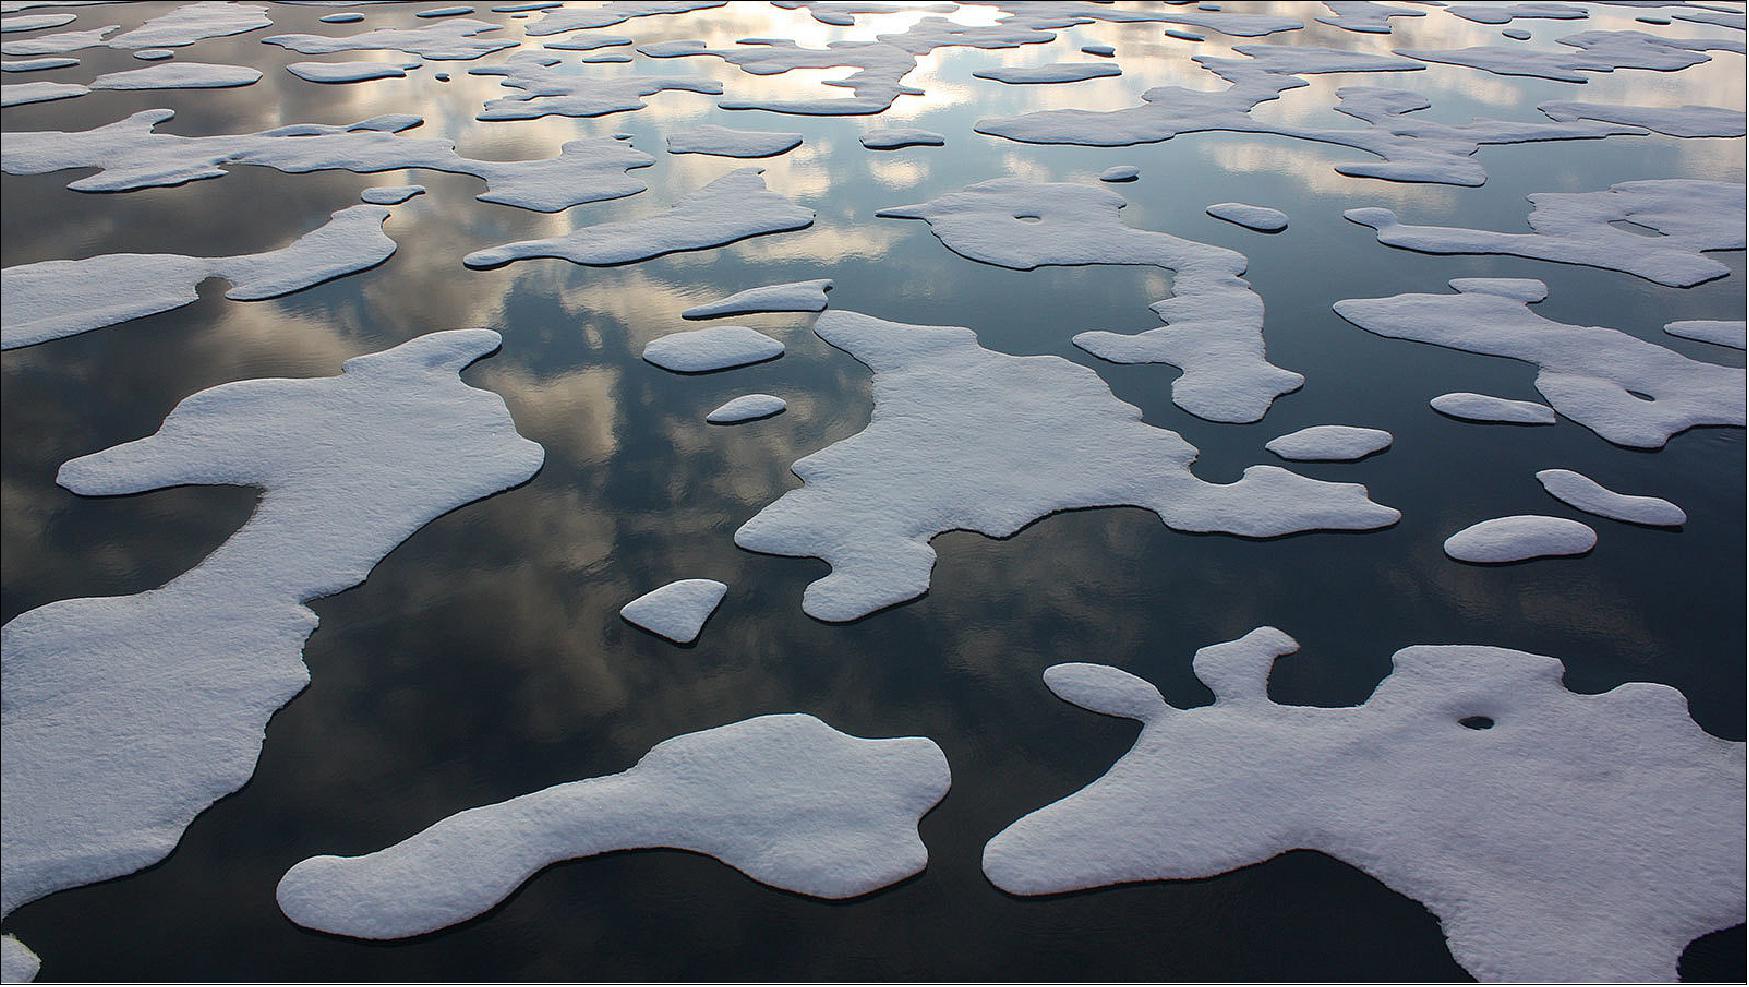 Figure 98: Arctic sea ice was photographed in 2011 during NASA's ICESCAPE (Impacts of Climate on Ecosystems and Chemistry of the Arctic Pacific Environment) mission, a shipborne investigation to study how changing conditions in the Arctic affect the ocean's chemistry and ecosystems. The bulk of the research took place in the Beaufort and Chukchi seas in the summers of 2010 and 2011 (image credit: NASA/Kathryn Hansen)